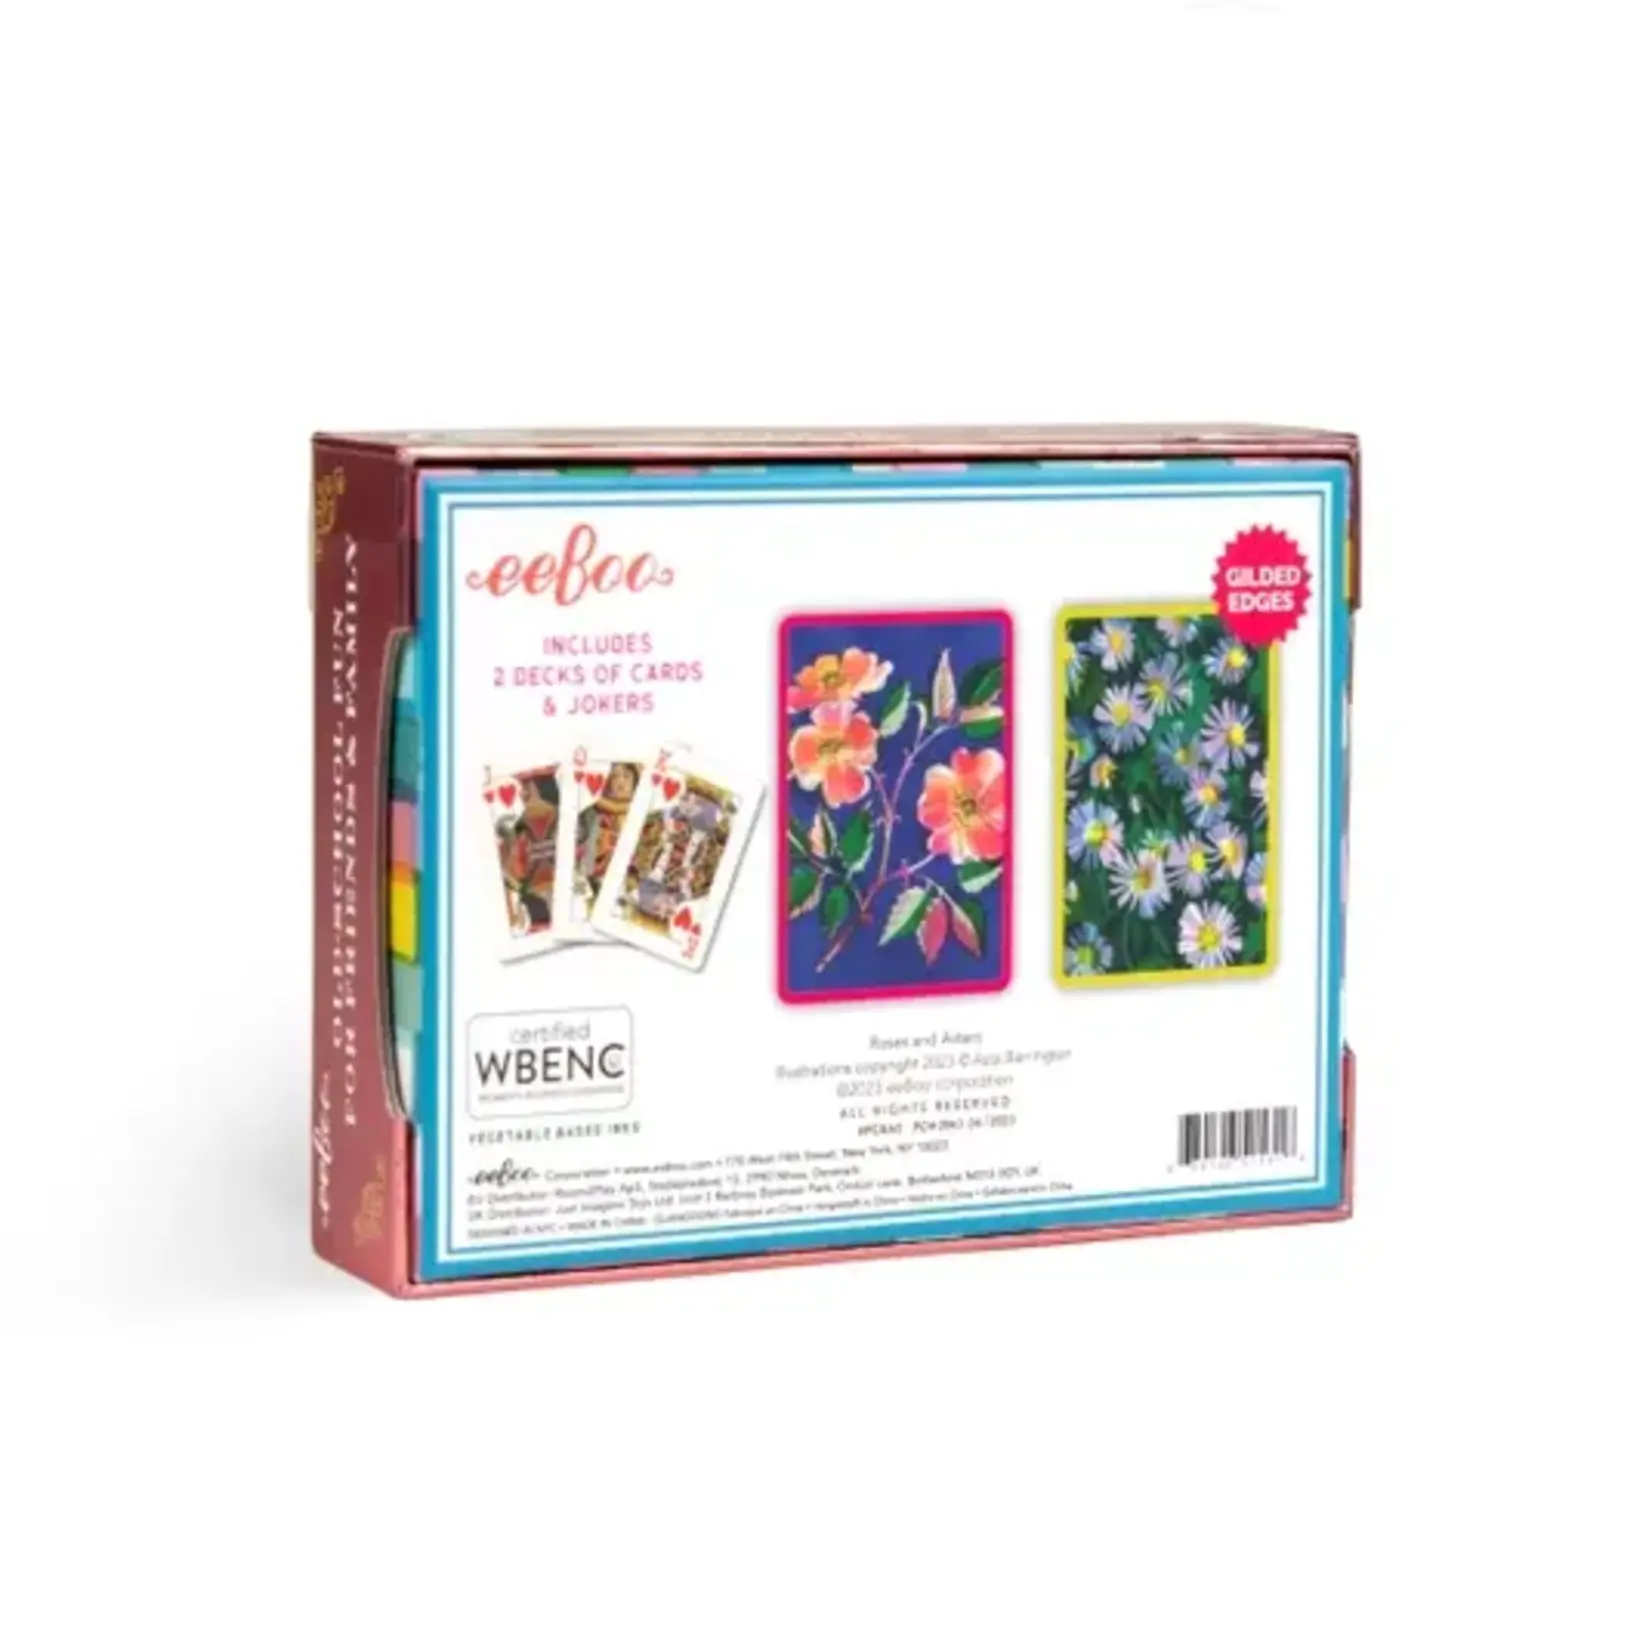 Roses & Asters Playing Cards